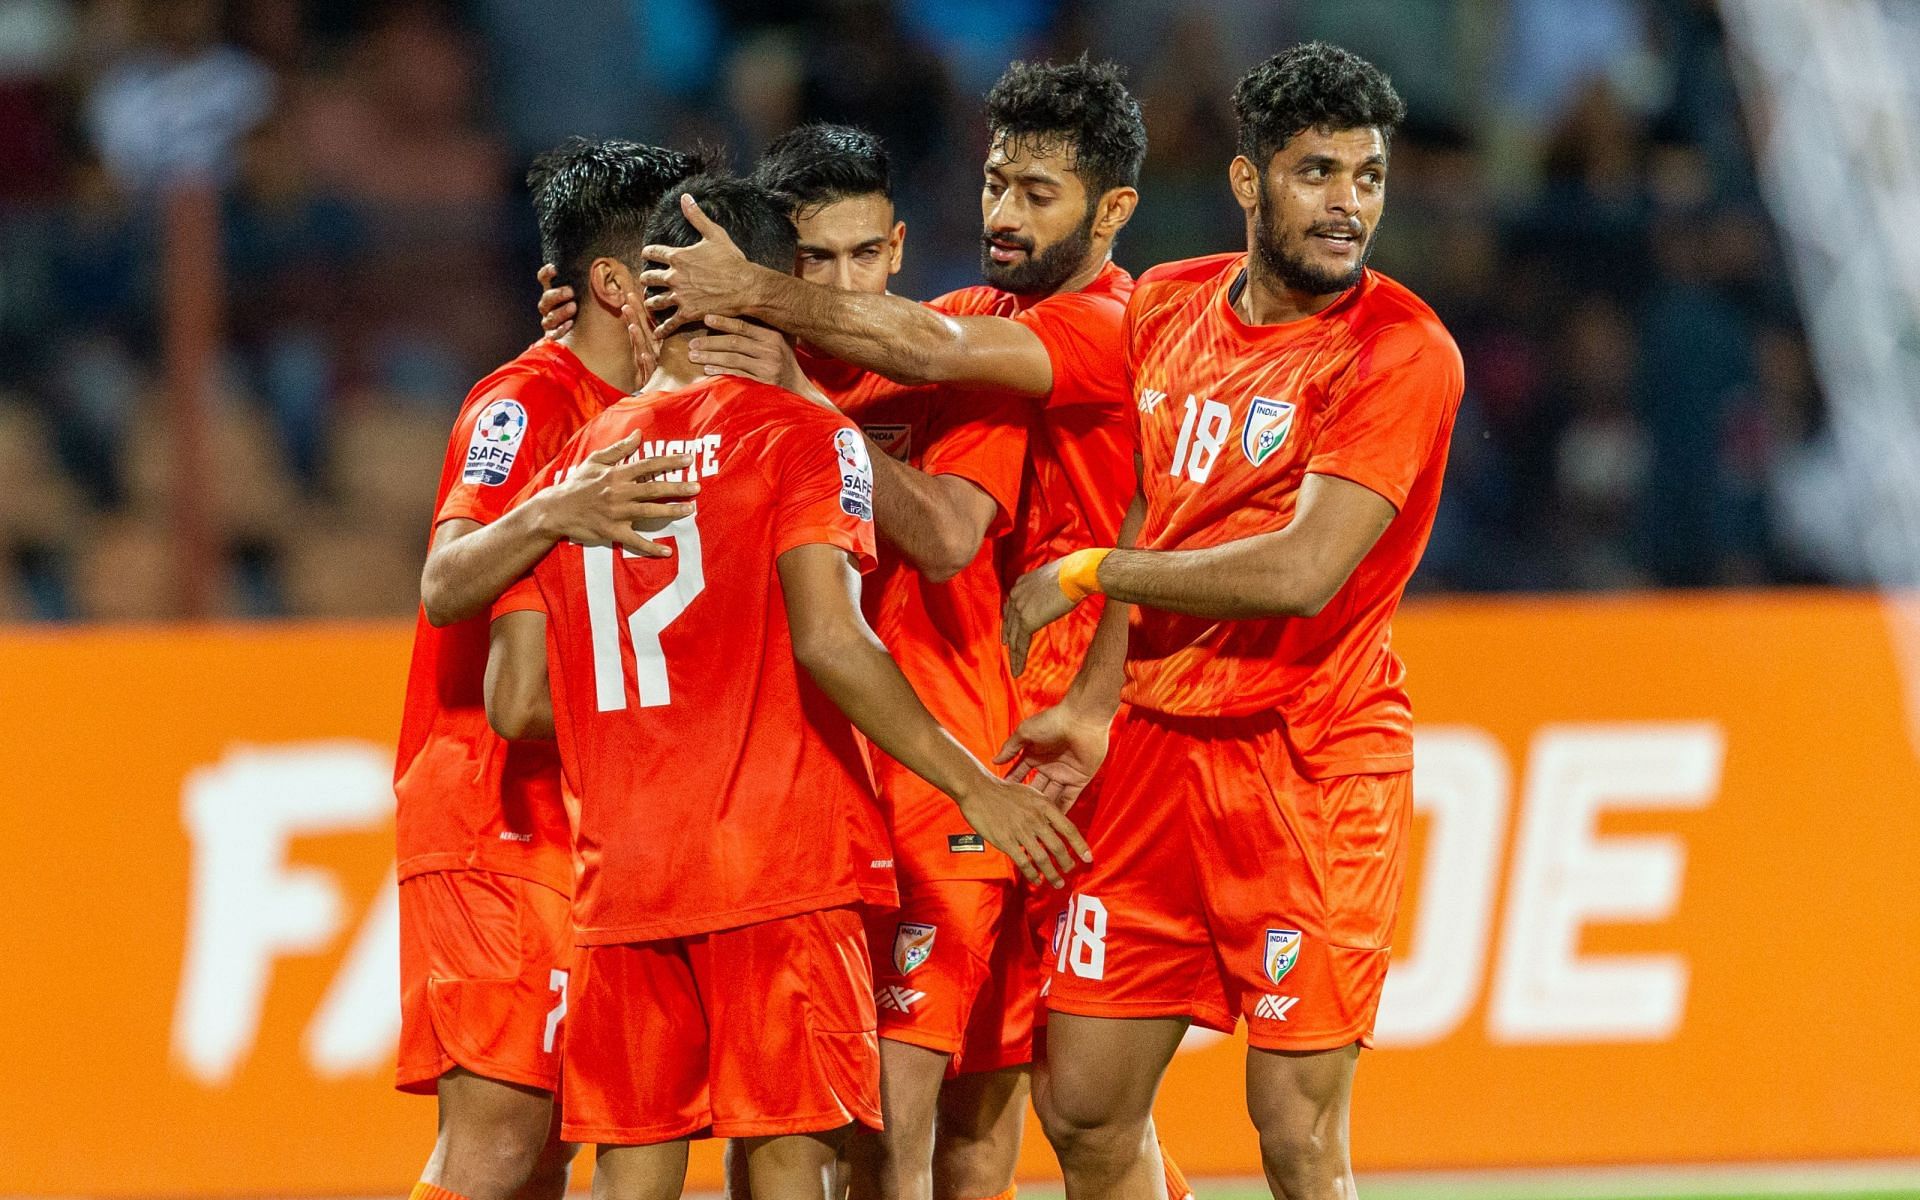 There have been weeks of doubt regarding the participation of the Indian football team in the Asian Games.